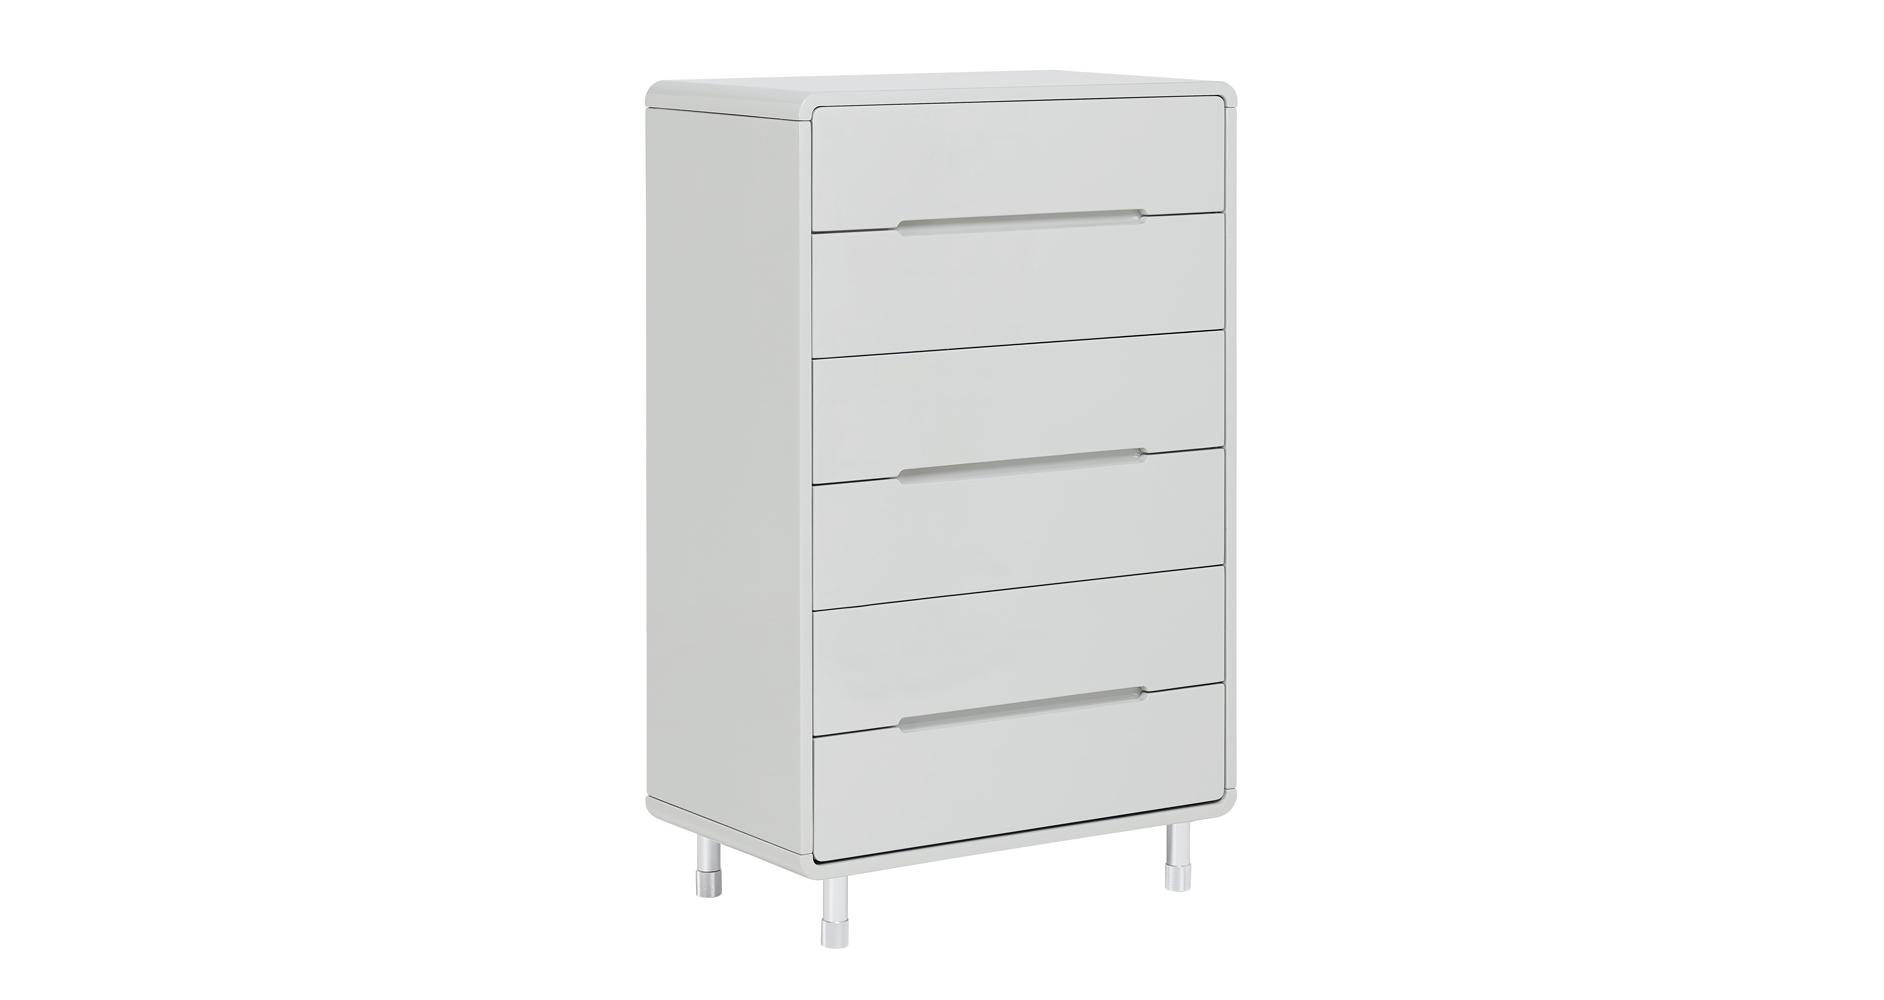 Notch Ii Bedroom Chest Of Drawers 6 Drawers | DFS